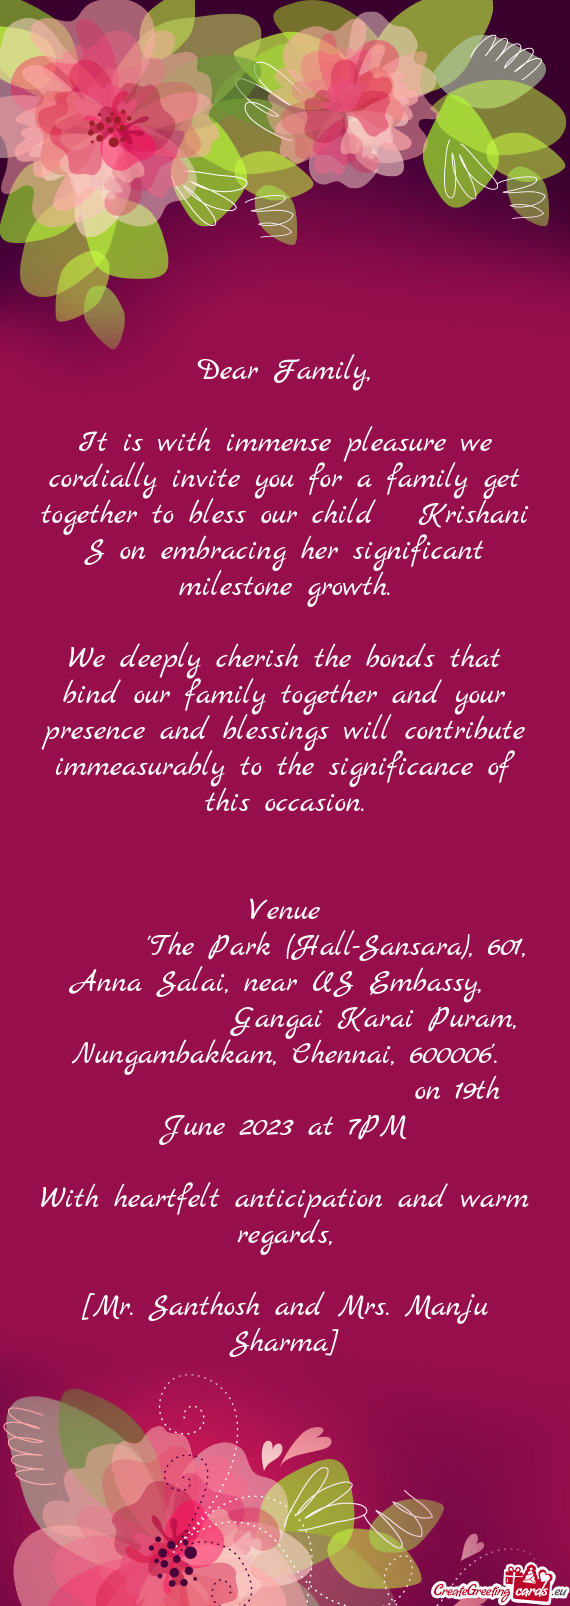 It is with immense pleasure we cordially invite you for a family get together to bless our child K